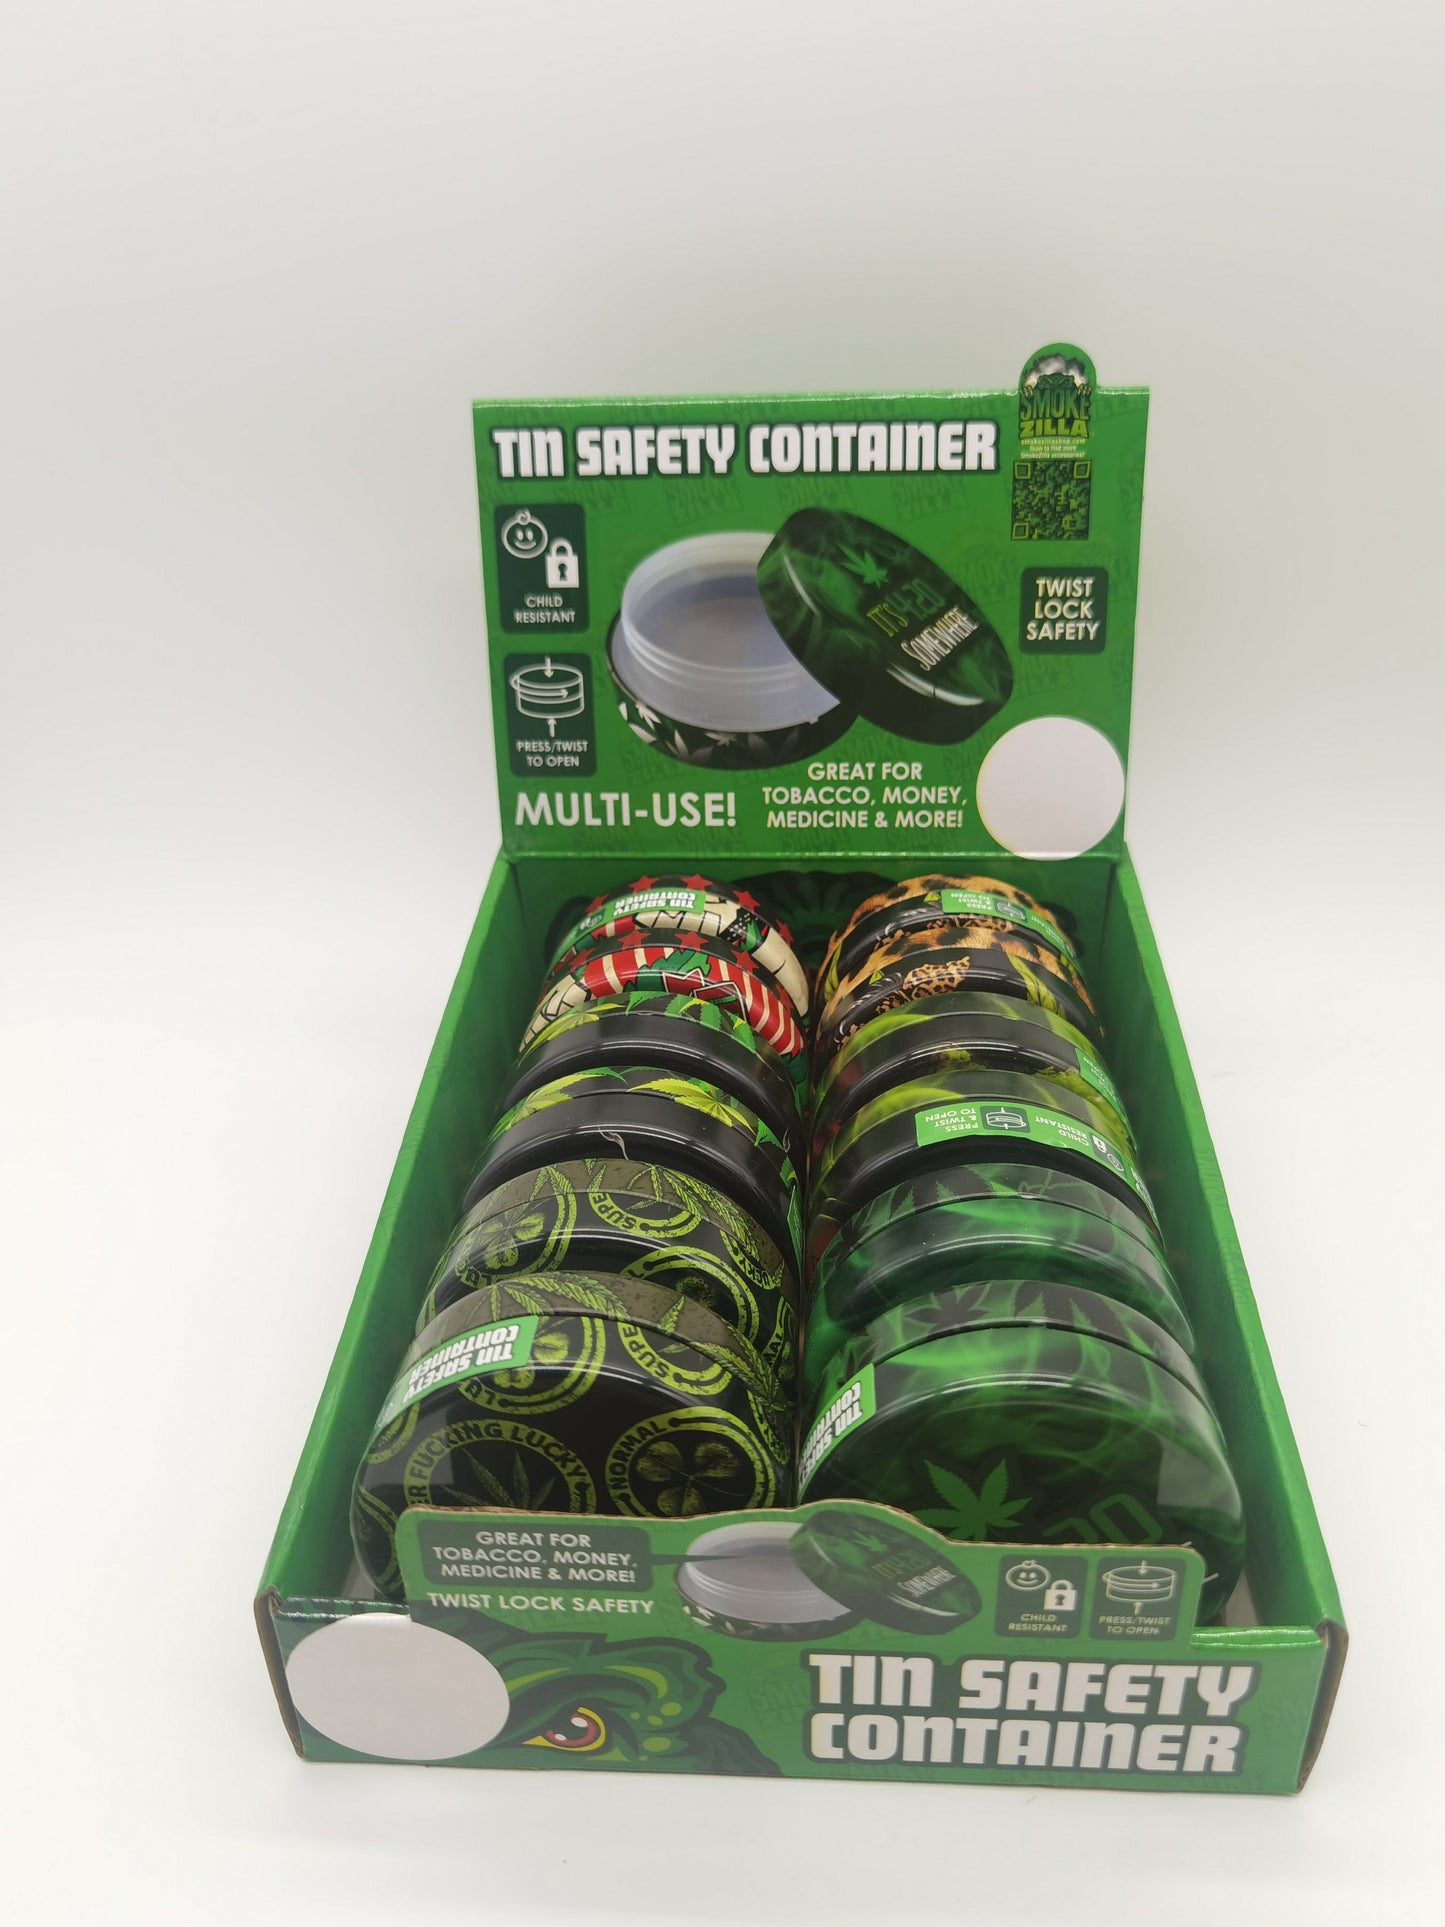 ITEM NUMBER 030032 METAL SAFETY CONTAINER MIX X 12 PIECES PER DISPLAY